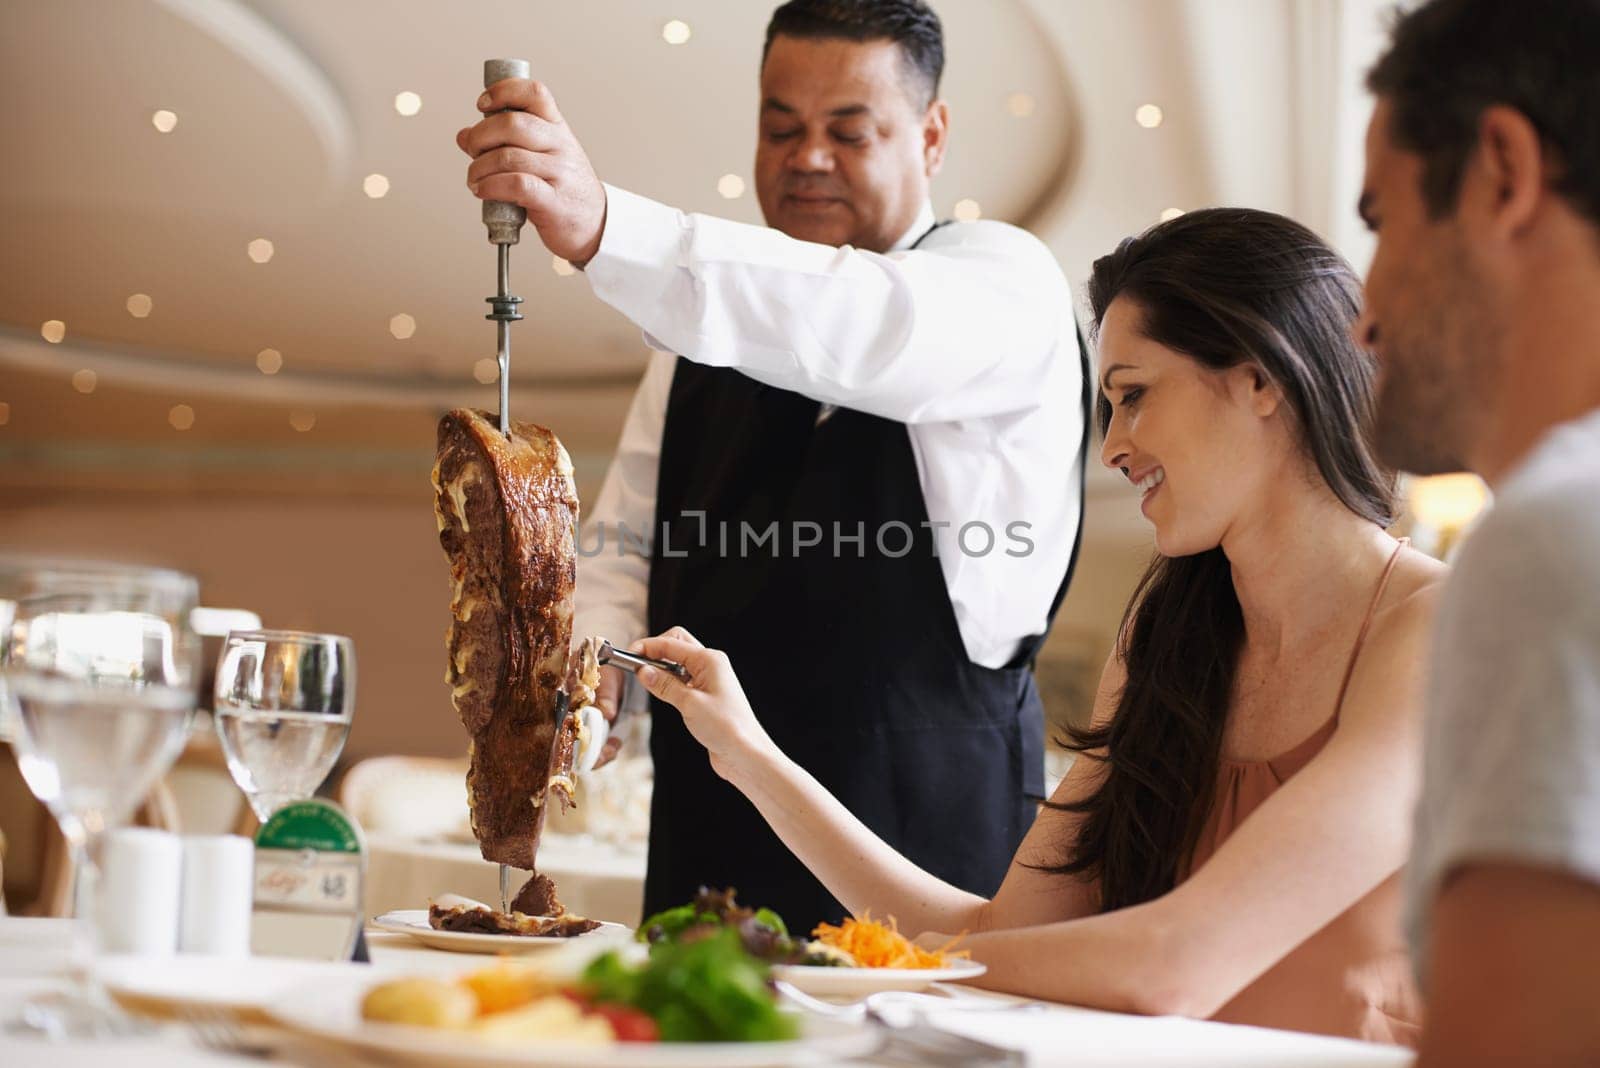 Couple, waiter and serving for dinner in restaurant with meat, happiness and fine dining for anniversary or honeymoon. Man, woman and employee with steak on skewer, healthy meal and table in London.